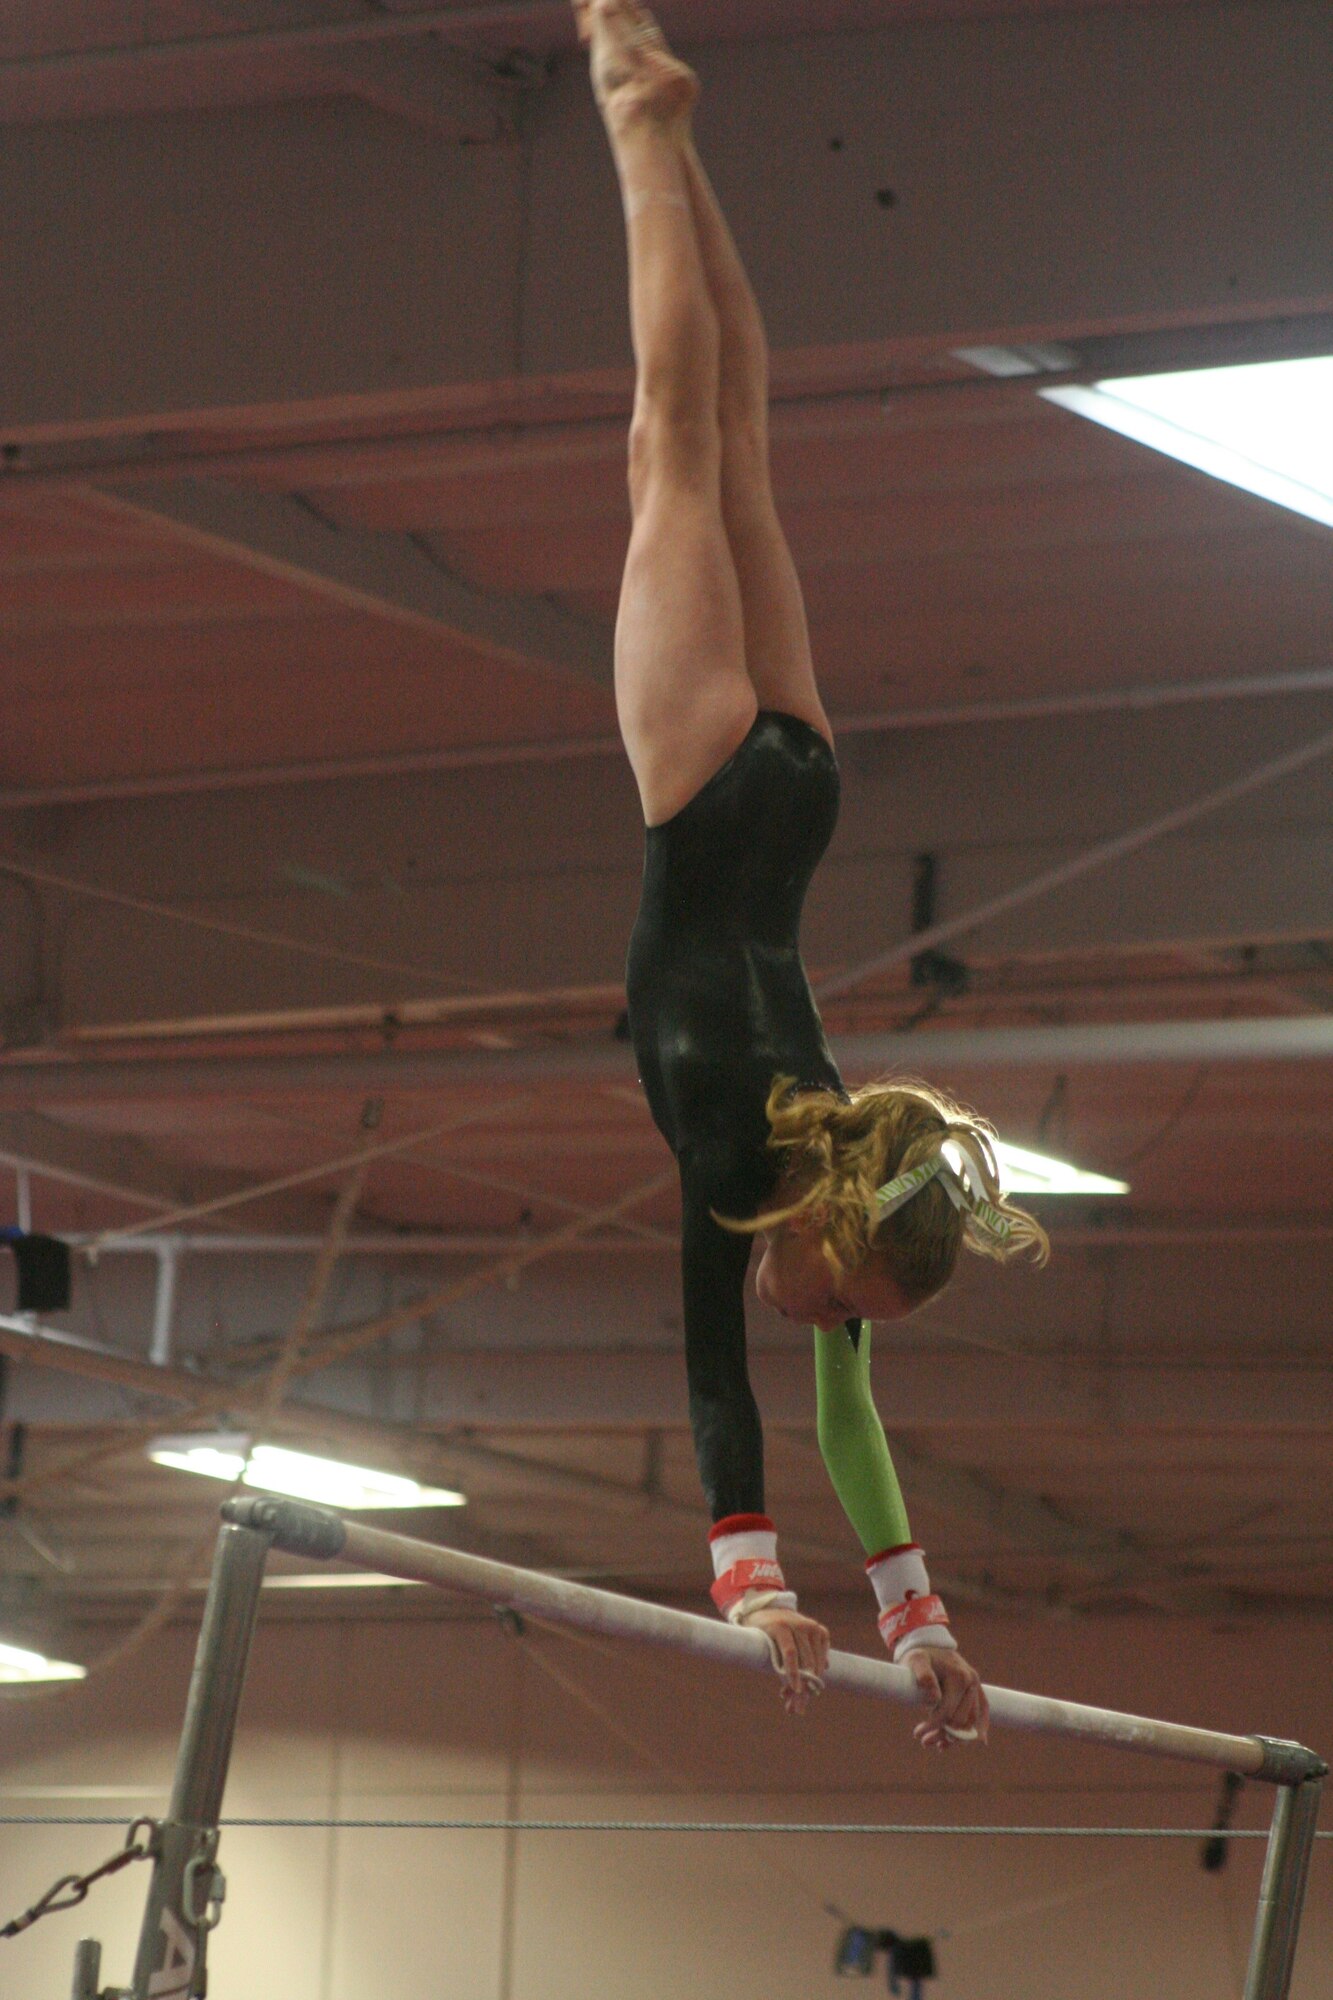 CAMARILLO, Calif. -- Ashley Castellenos, age 13, performs a handstand during her bar routine at the Snowflake Classic gymnastics competition Feb. 7 here. Castellenos, who is with the Vandenberg Youth Programs Jets girls gymnastics Level 7 team, placed third on the bar, third on the beam and fourth all around. (Photo by Cheryl Castellenos)
